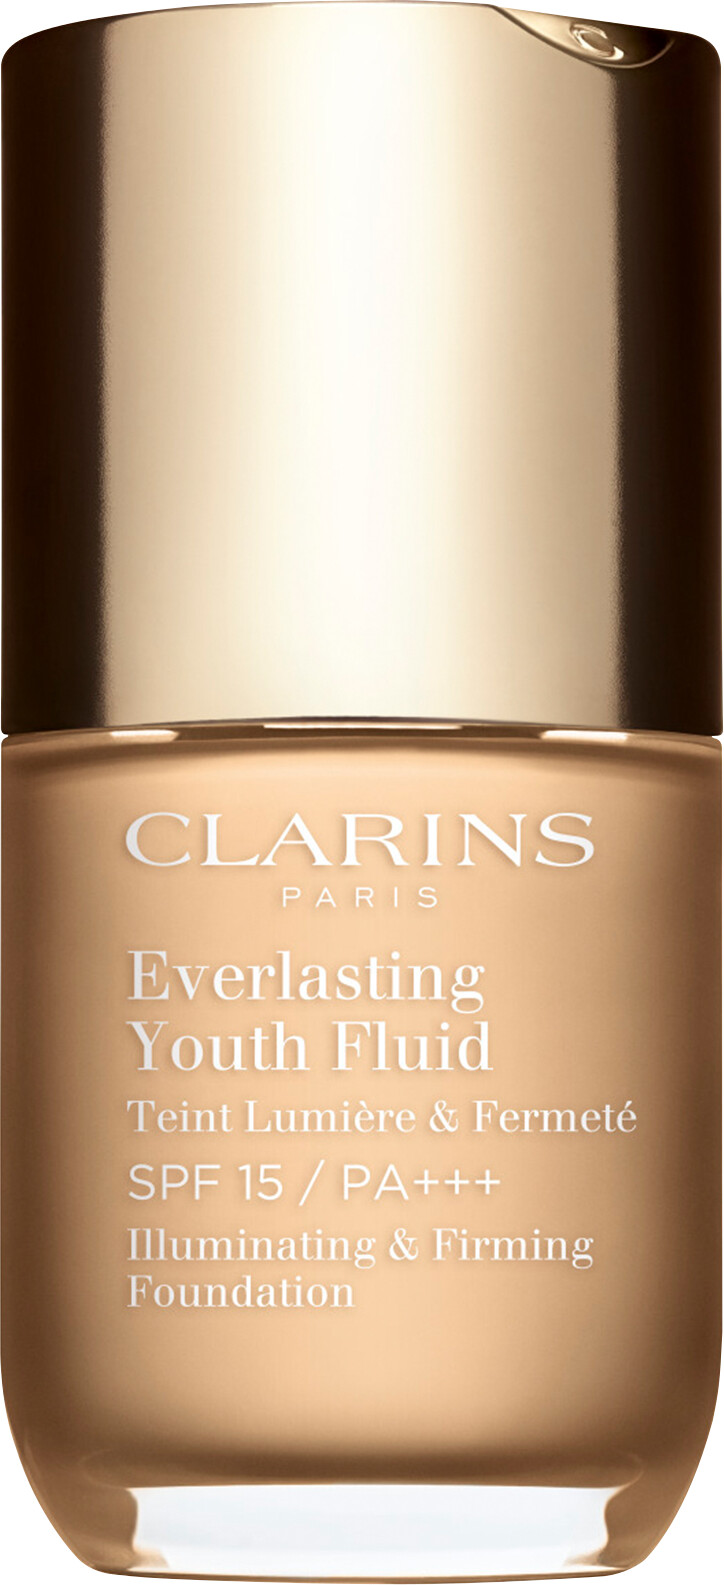 Clarins Everlasting Youth Fluid Illuminating and Firming Foundation SPF15 30ml 101 - Linen